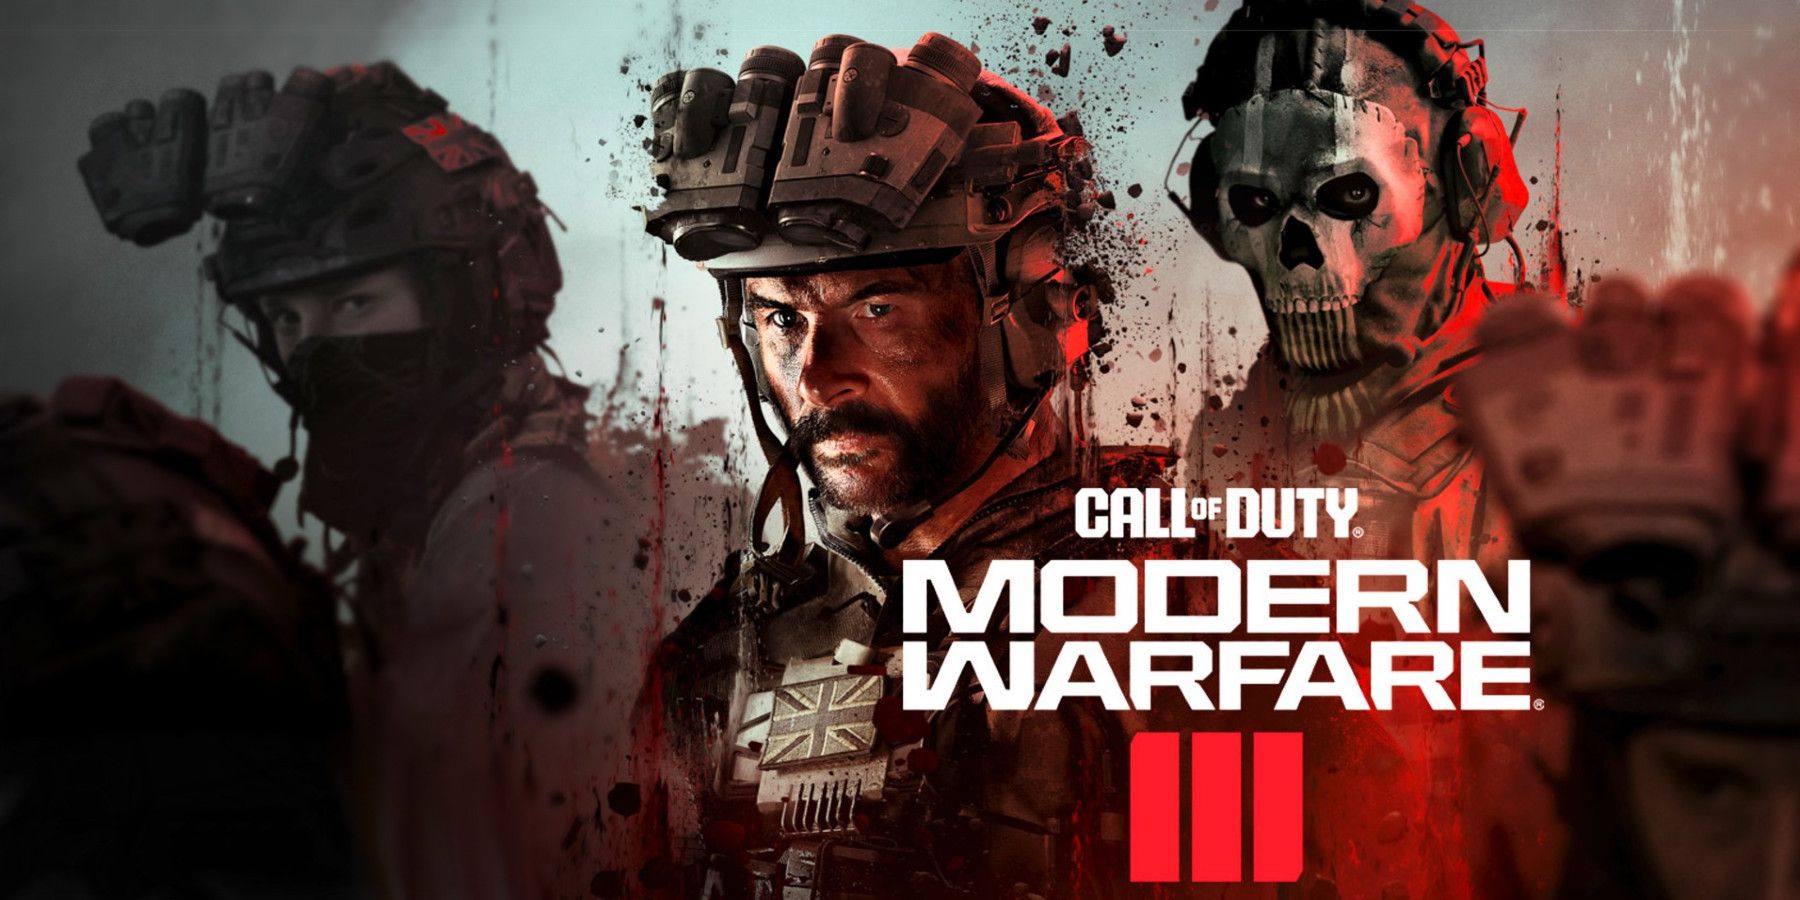 How to play the Call of Duty Modern Warfare 3 beta